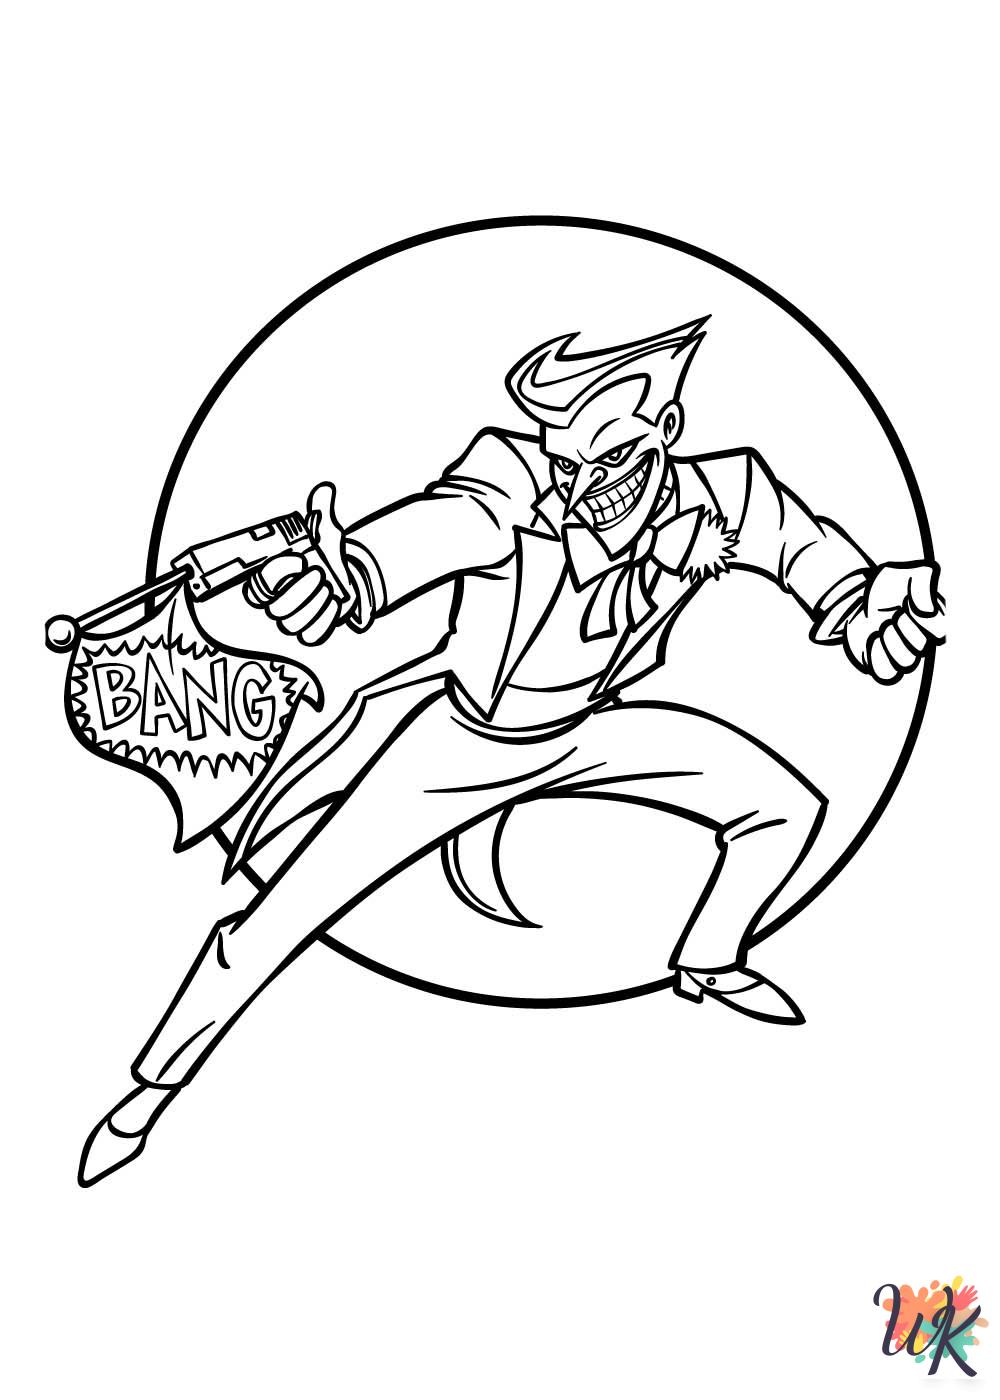 Joker free coloring pages